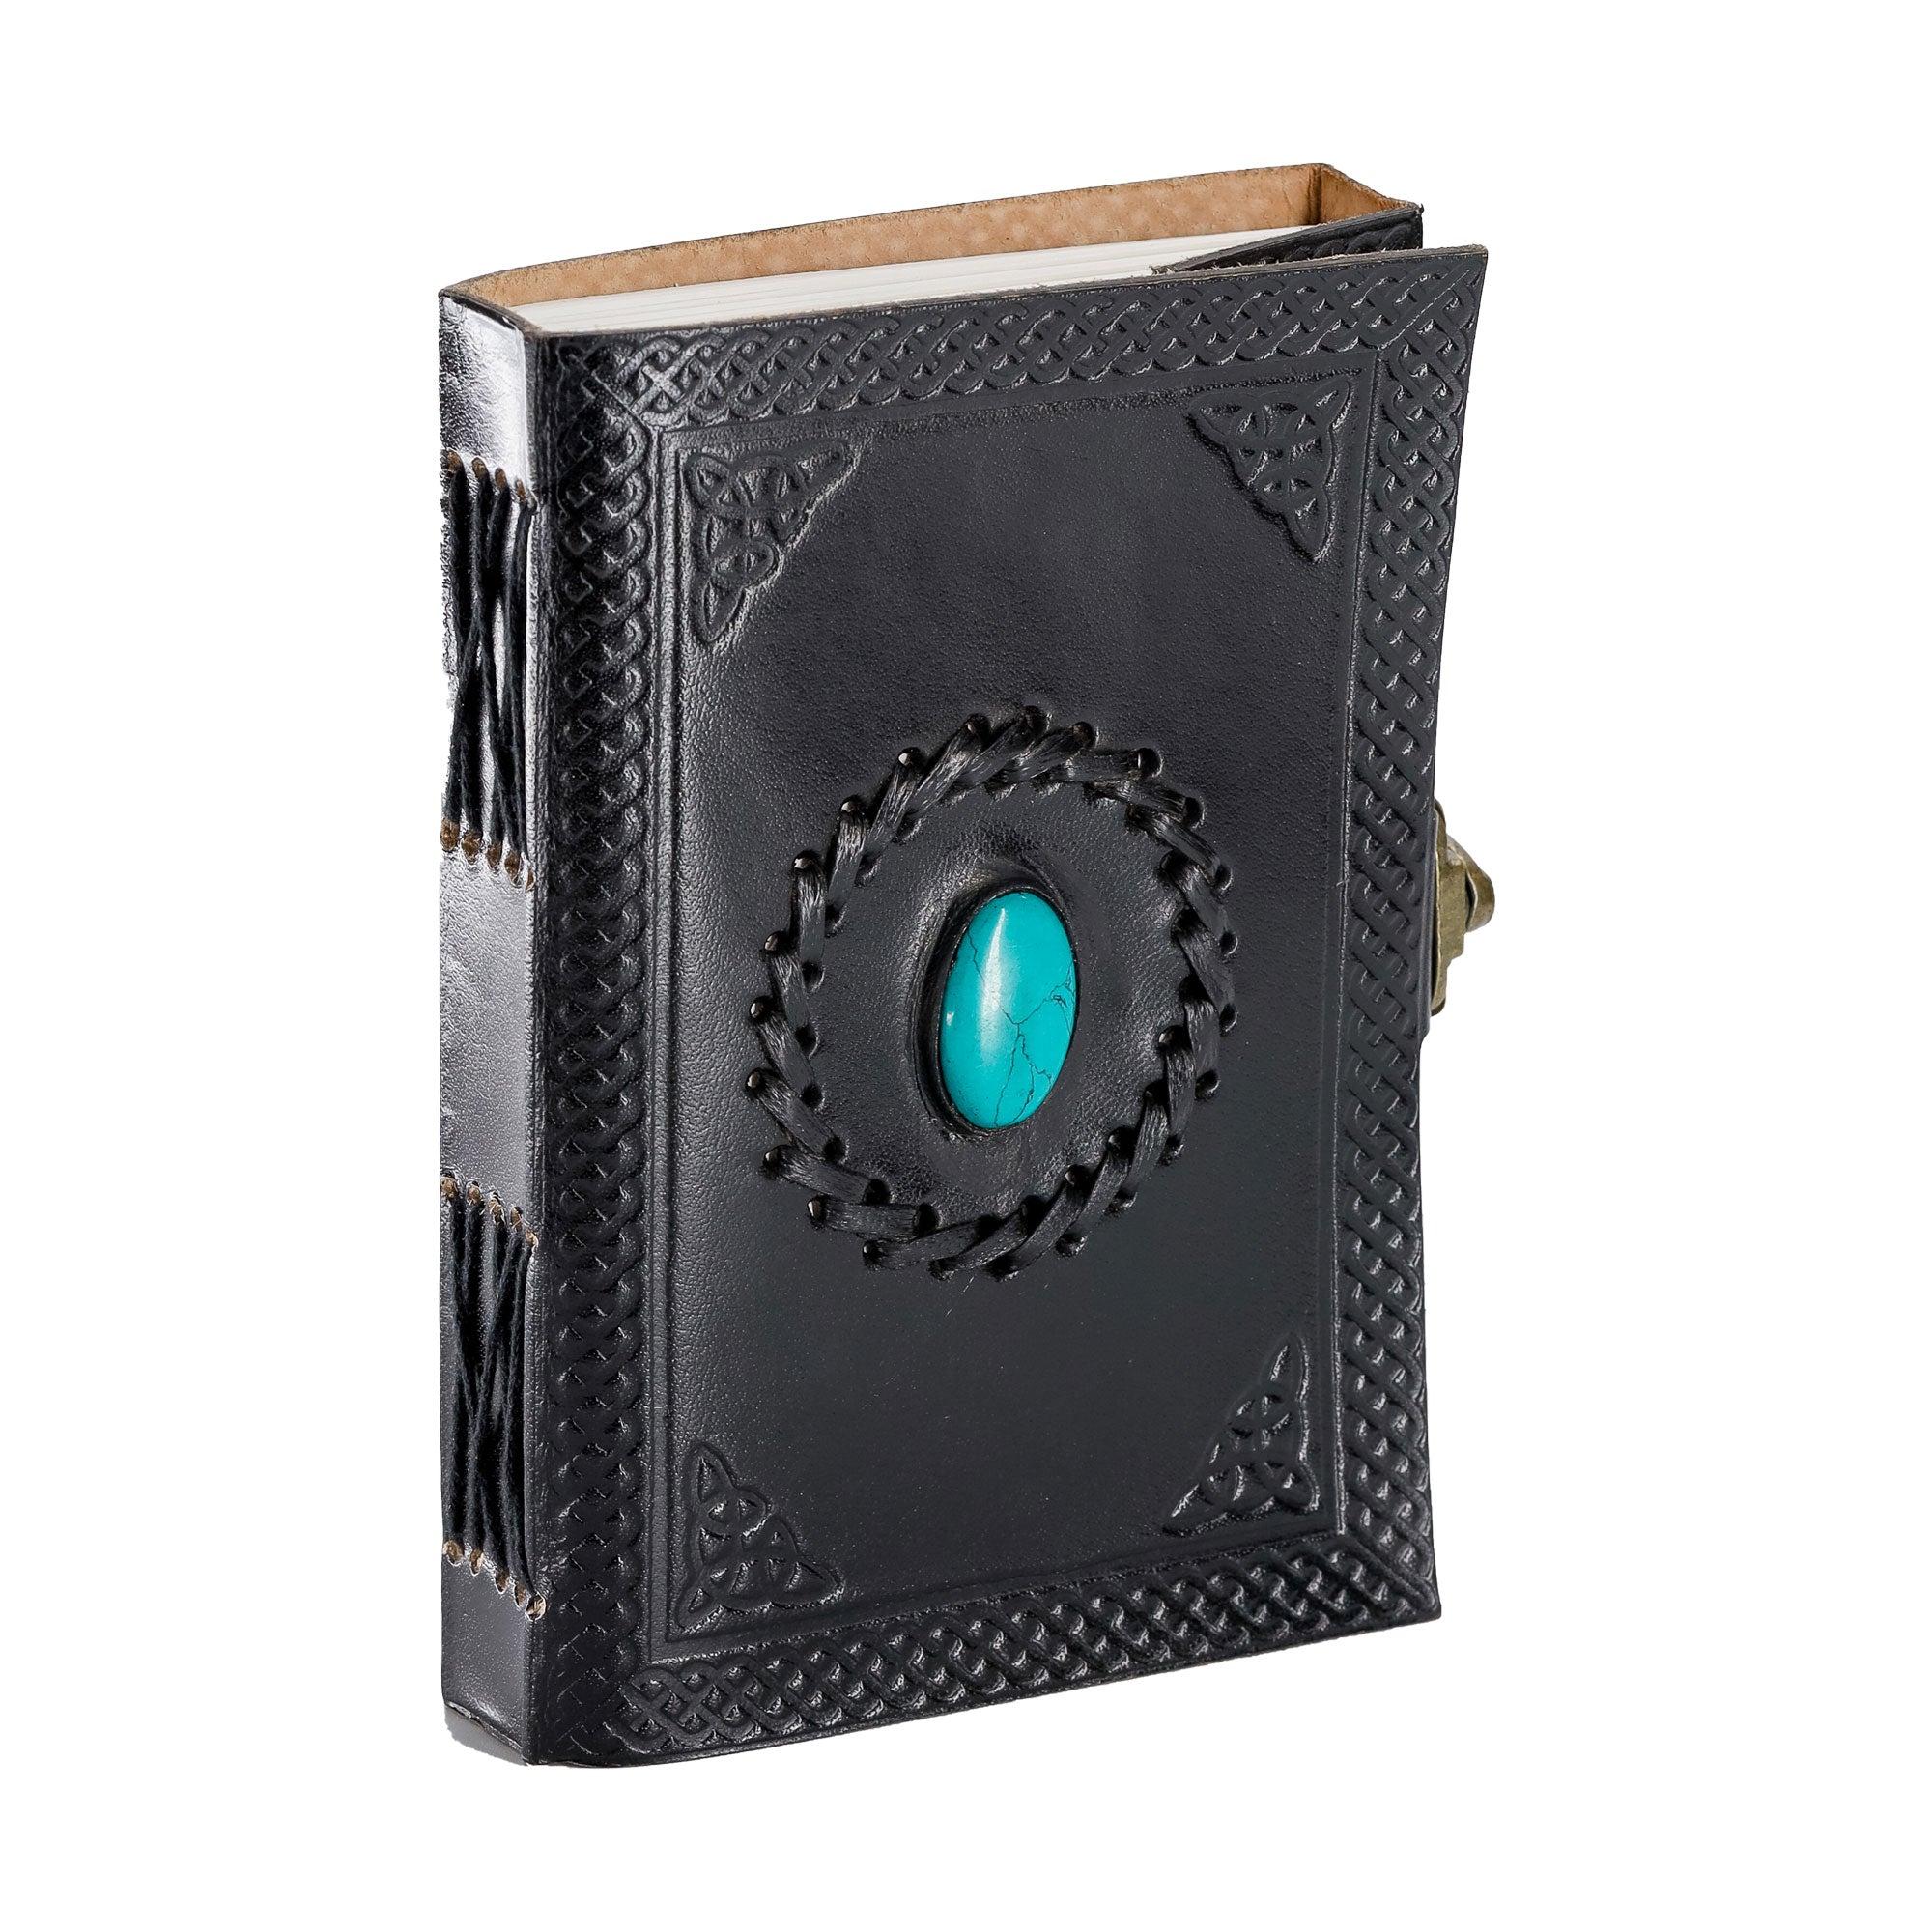 Leather Journal Handmade black stone Diary Stone journal Blank pages n